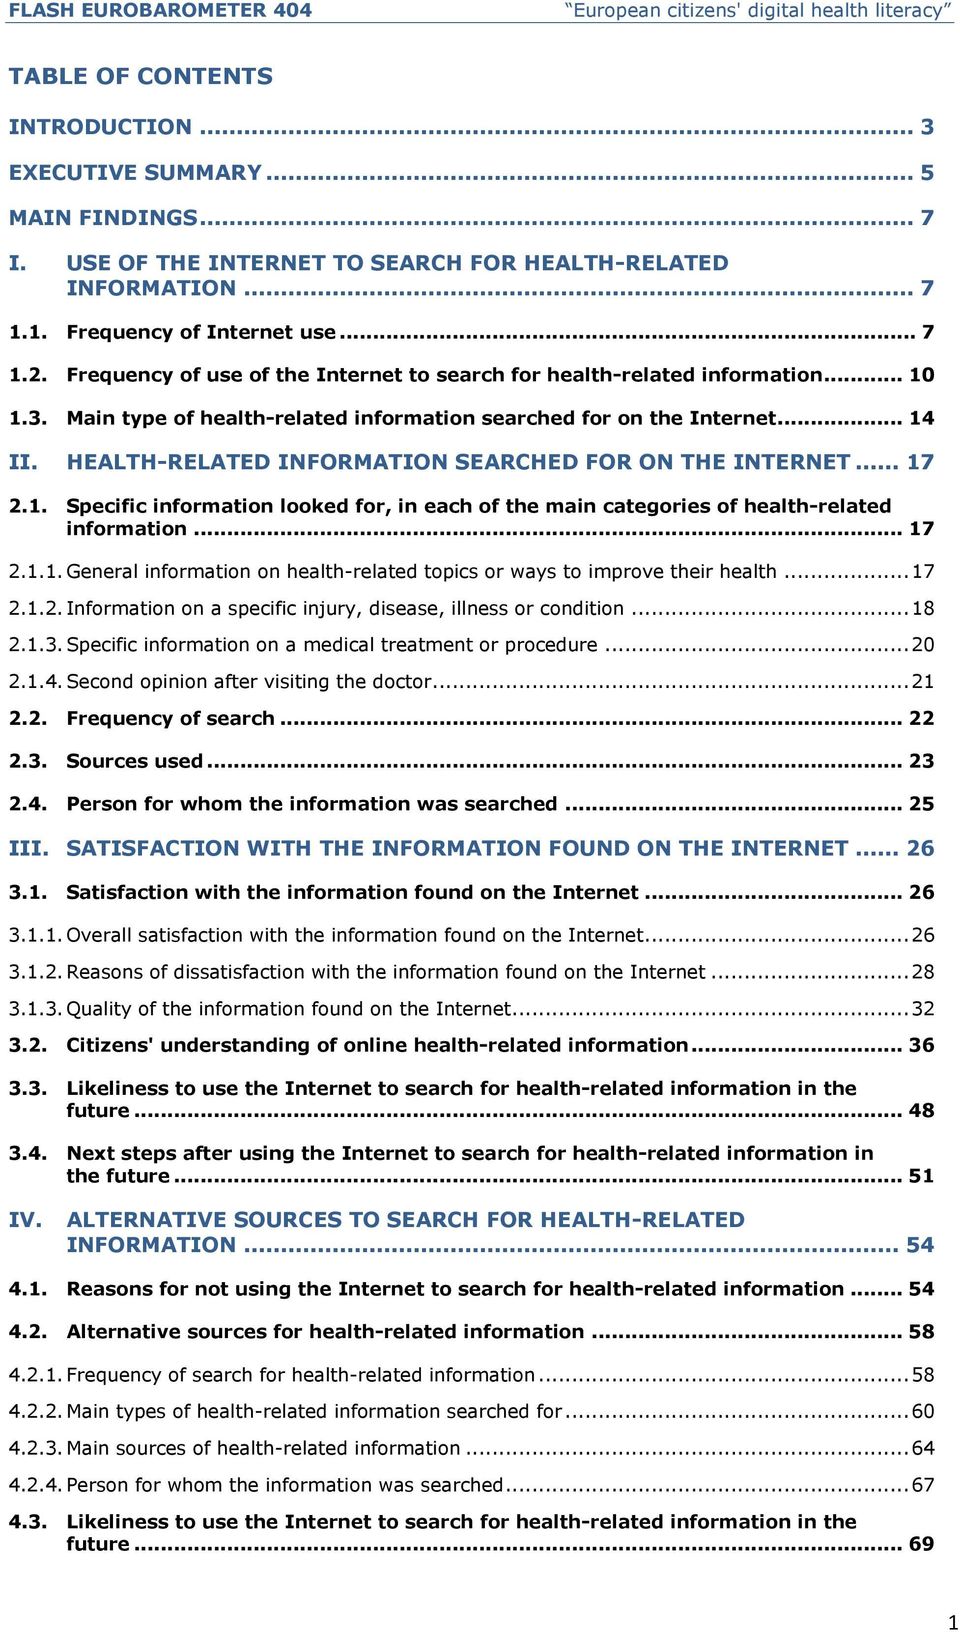 HEALTH-RELATED INFORMATION SEARCHED FOR ON THE INTERNET... 17 2.1. Specific information looked for, in each of the main categories of health-related information... 17 2.1.1. General information on health-related topics or ways to improve their health.